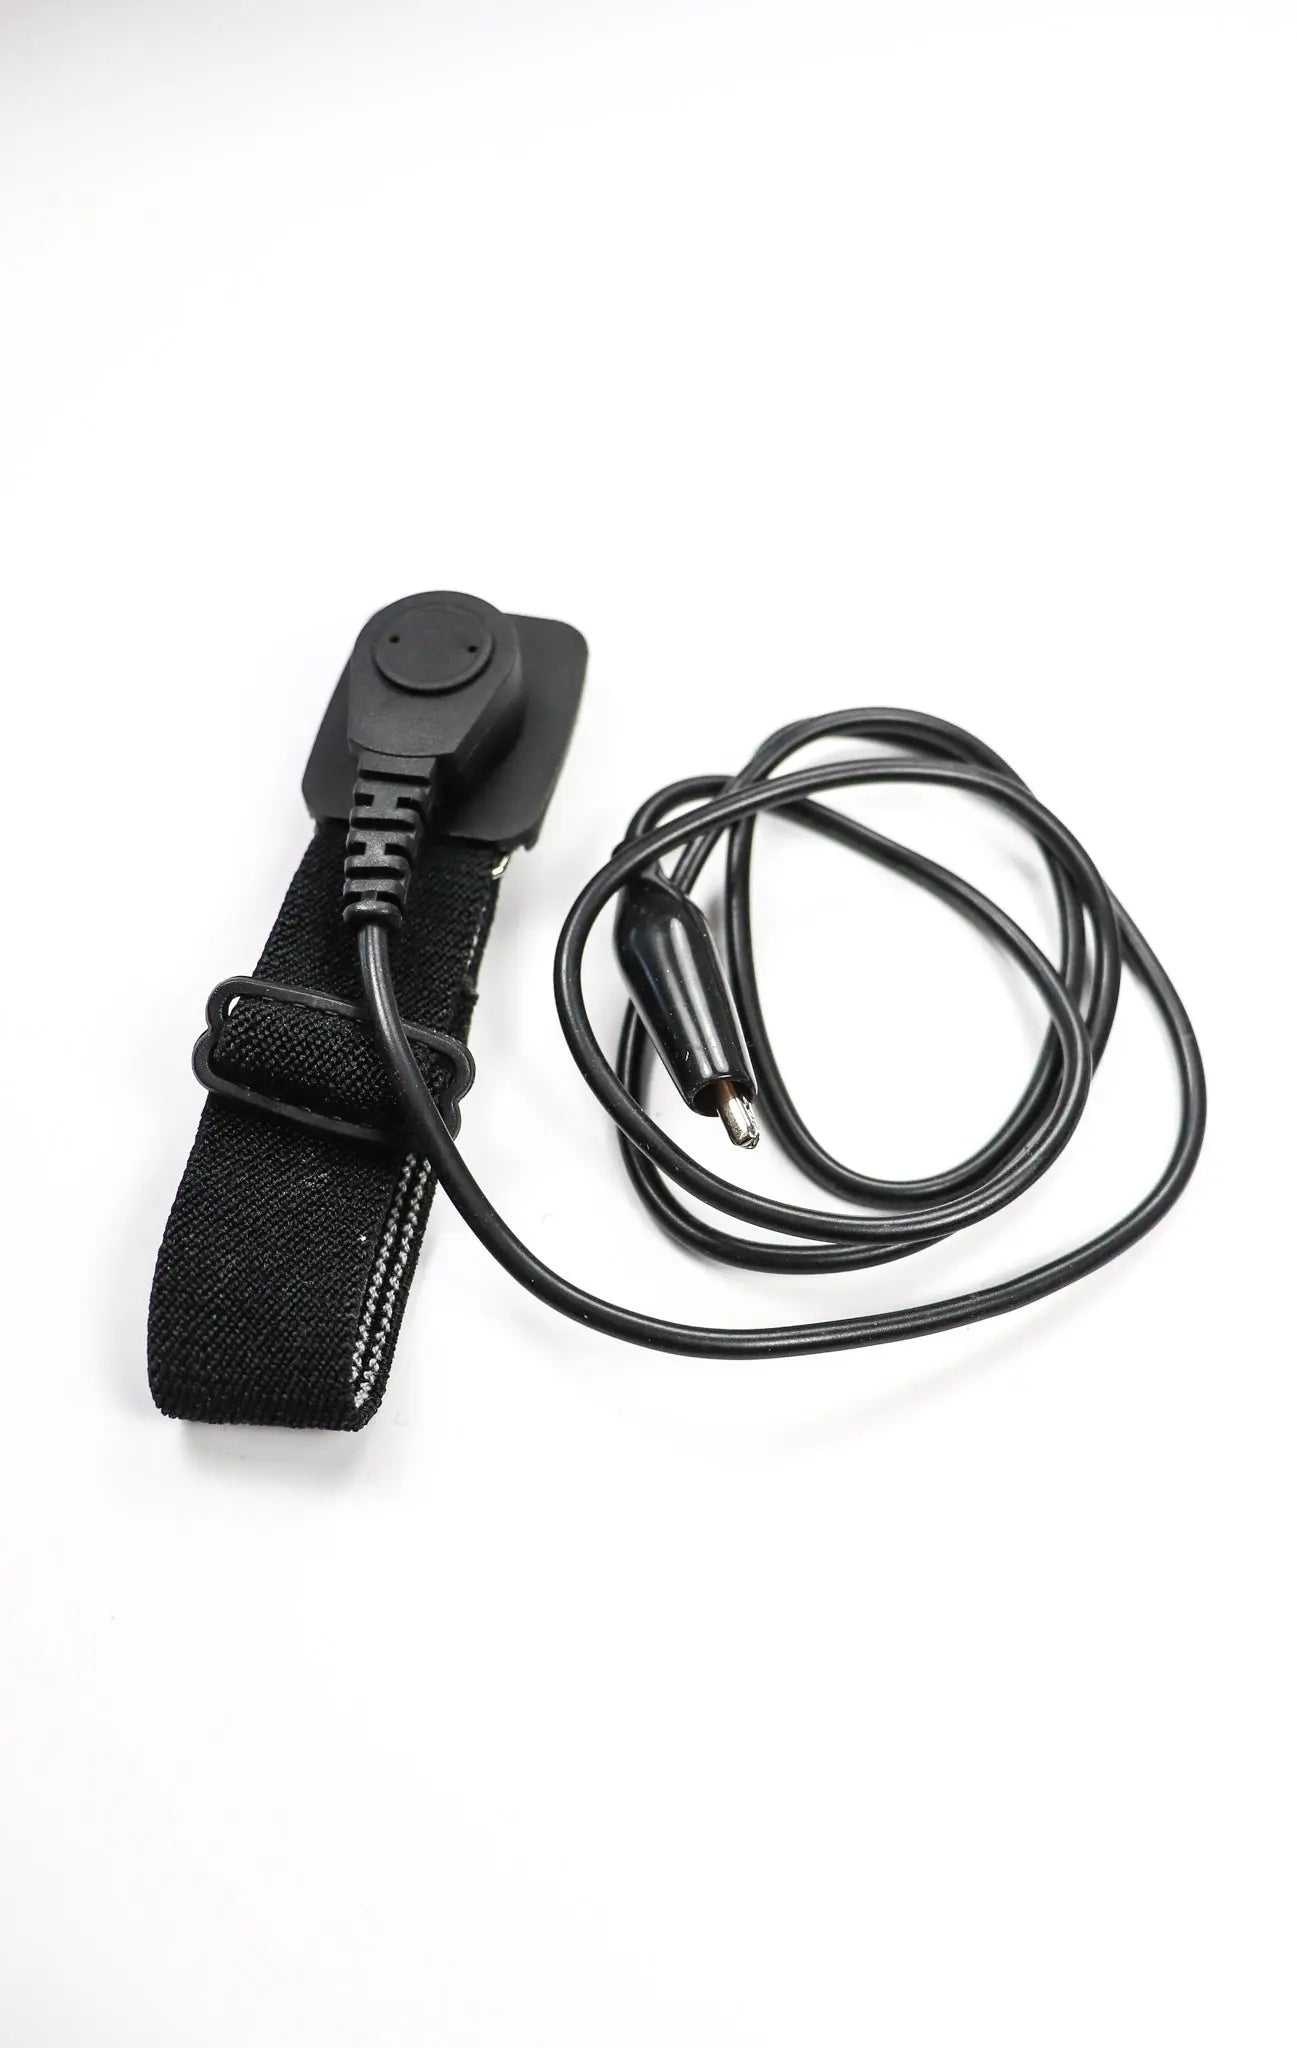 Antistatic Wrist Strap - THE STEMCELL SCIENCE SHOP